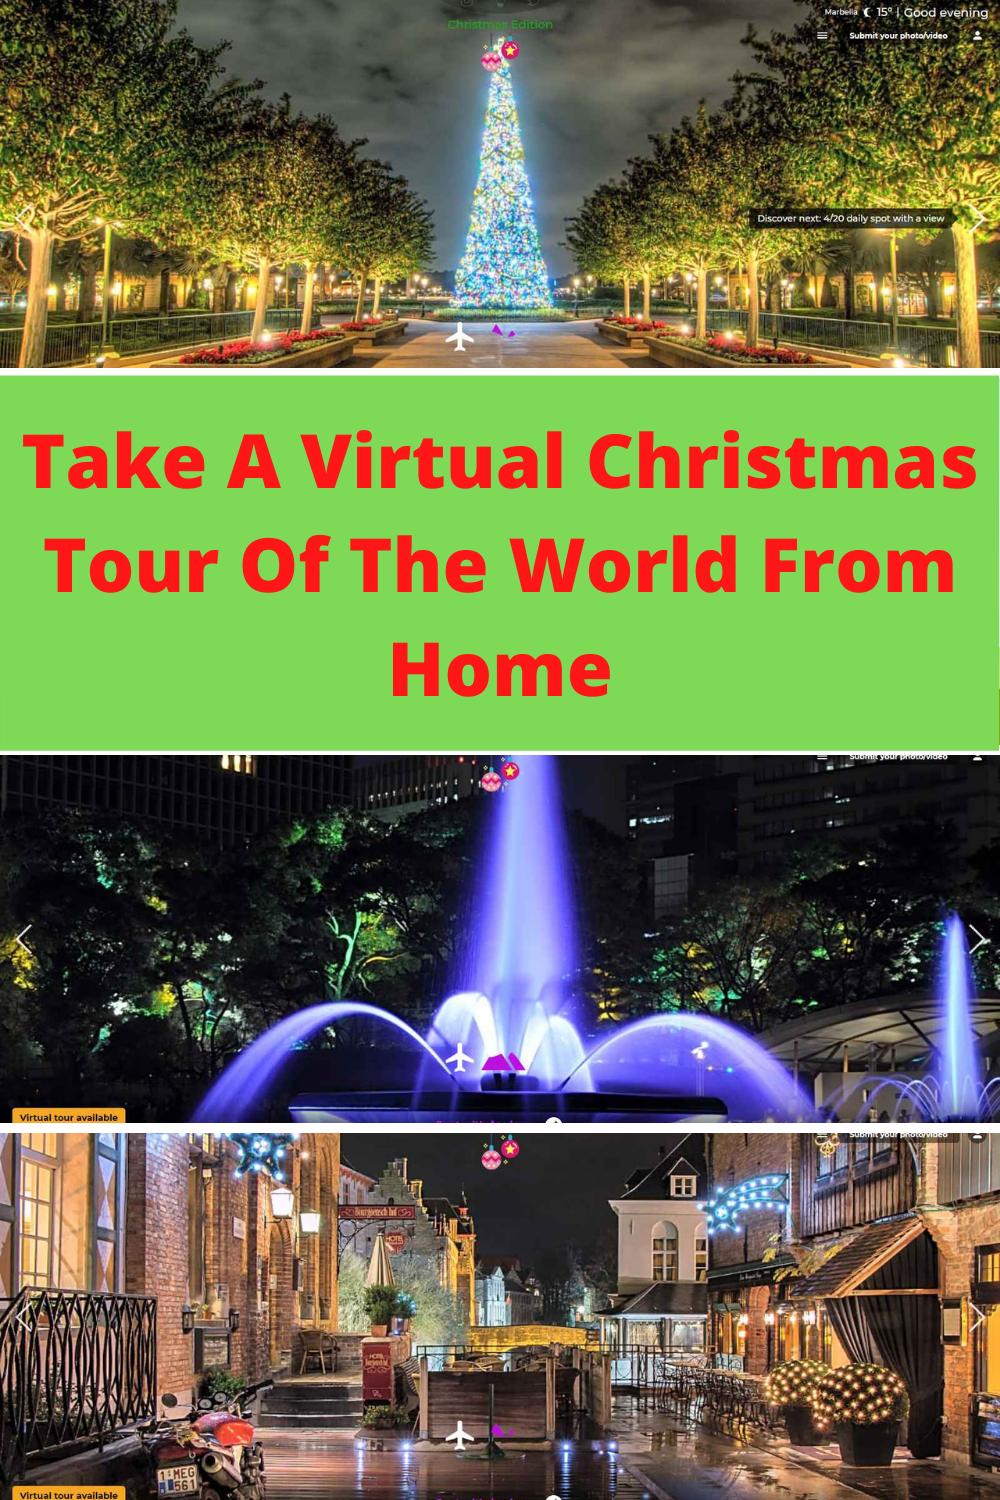 Take A Virtual Christmas Tour Of The World From Home